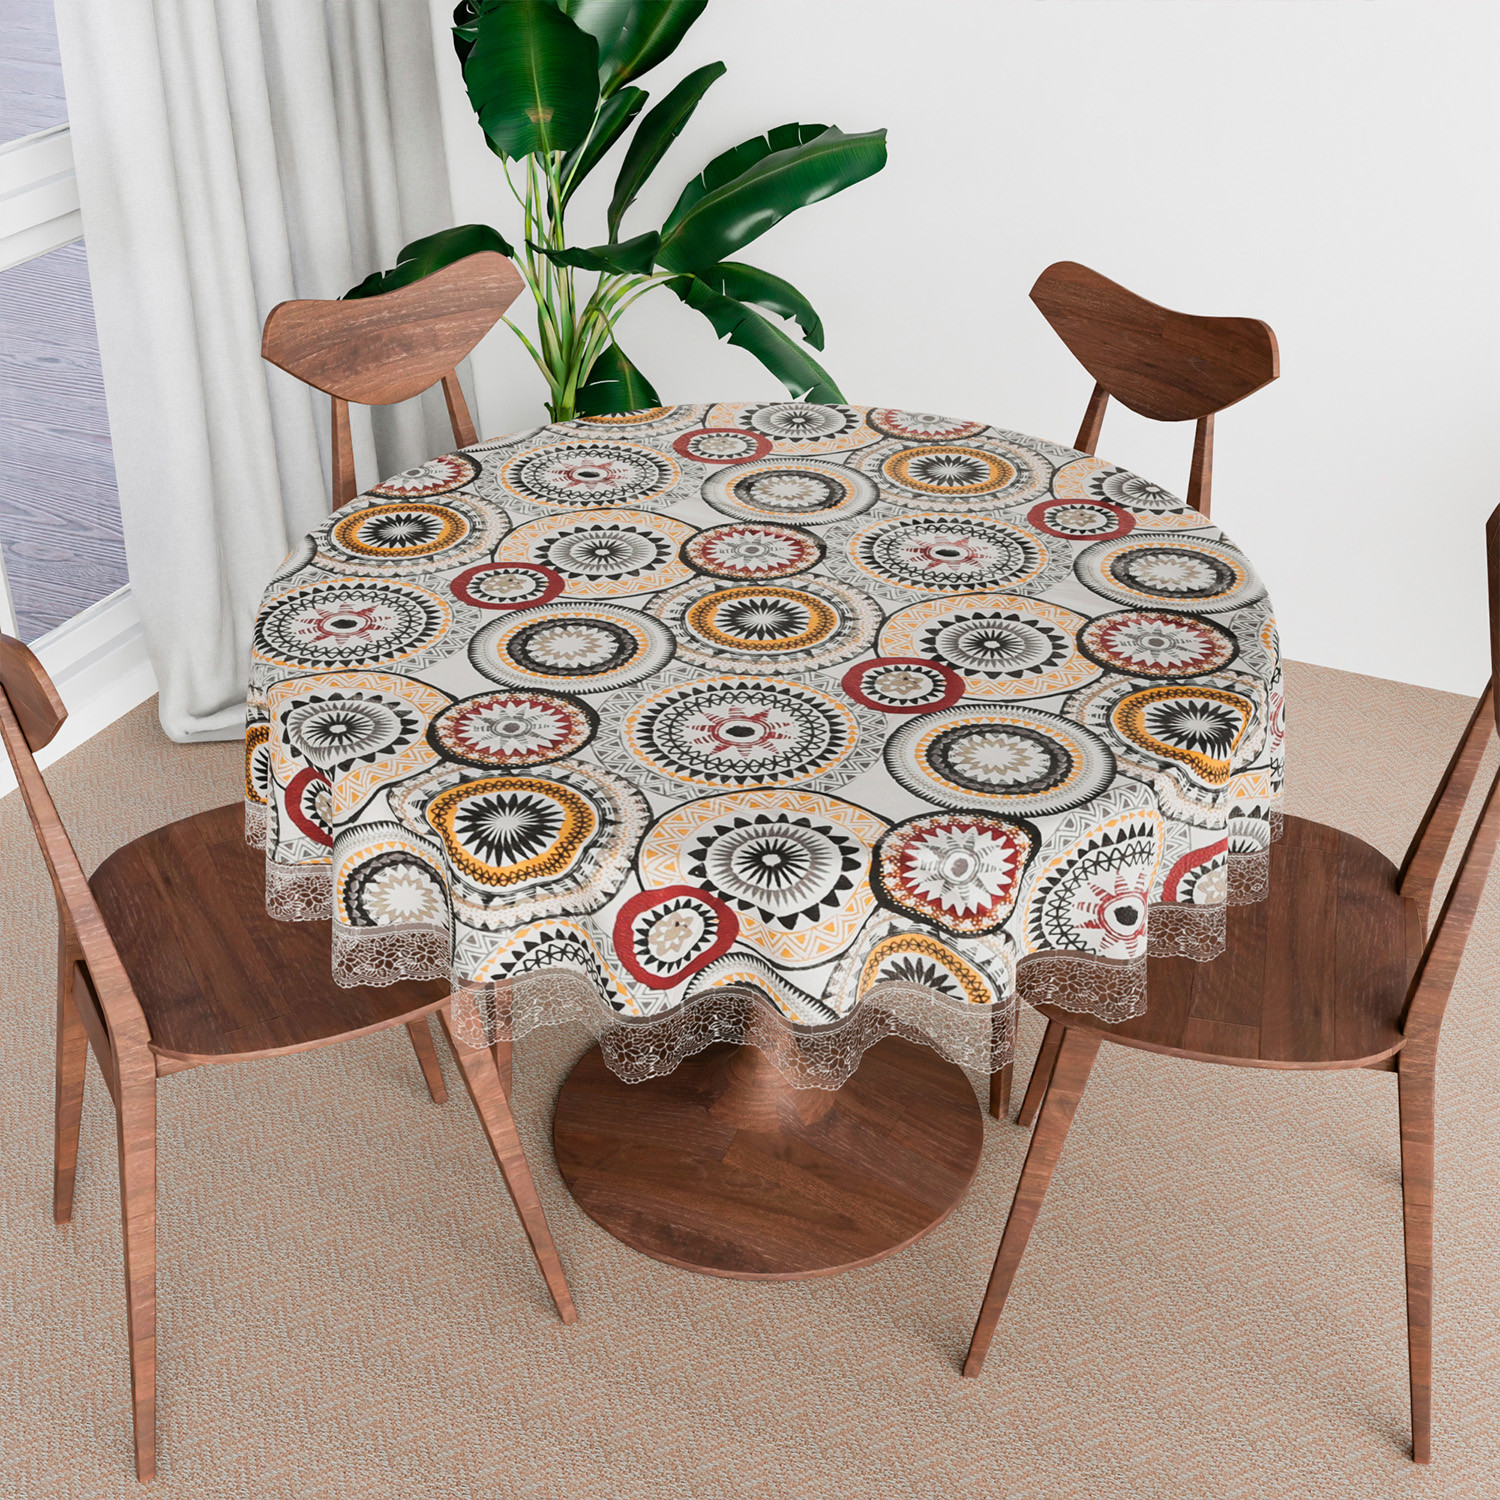 Kuber Industries Round Table Cover | PVC Table Cloth for Round Tables | 4 Seater Round Table Cloth | Rangoli Kitchen Dining Tablecloth | Tabletop Cover | 60 Inch | White